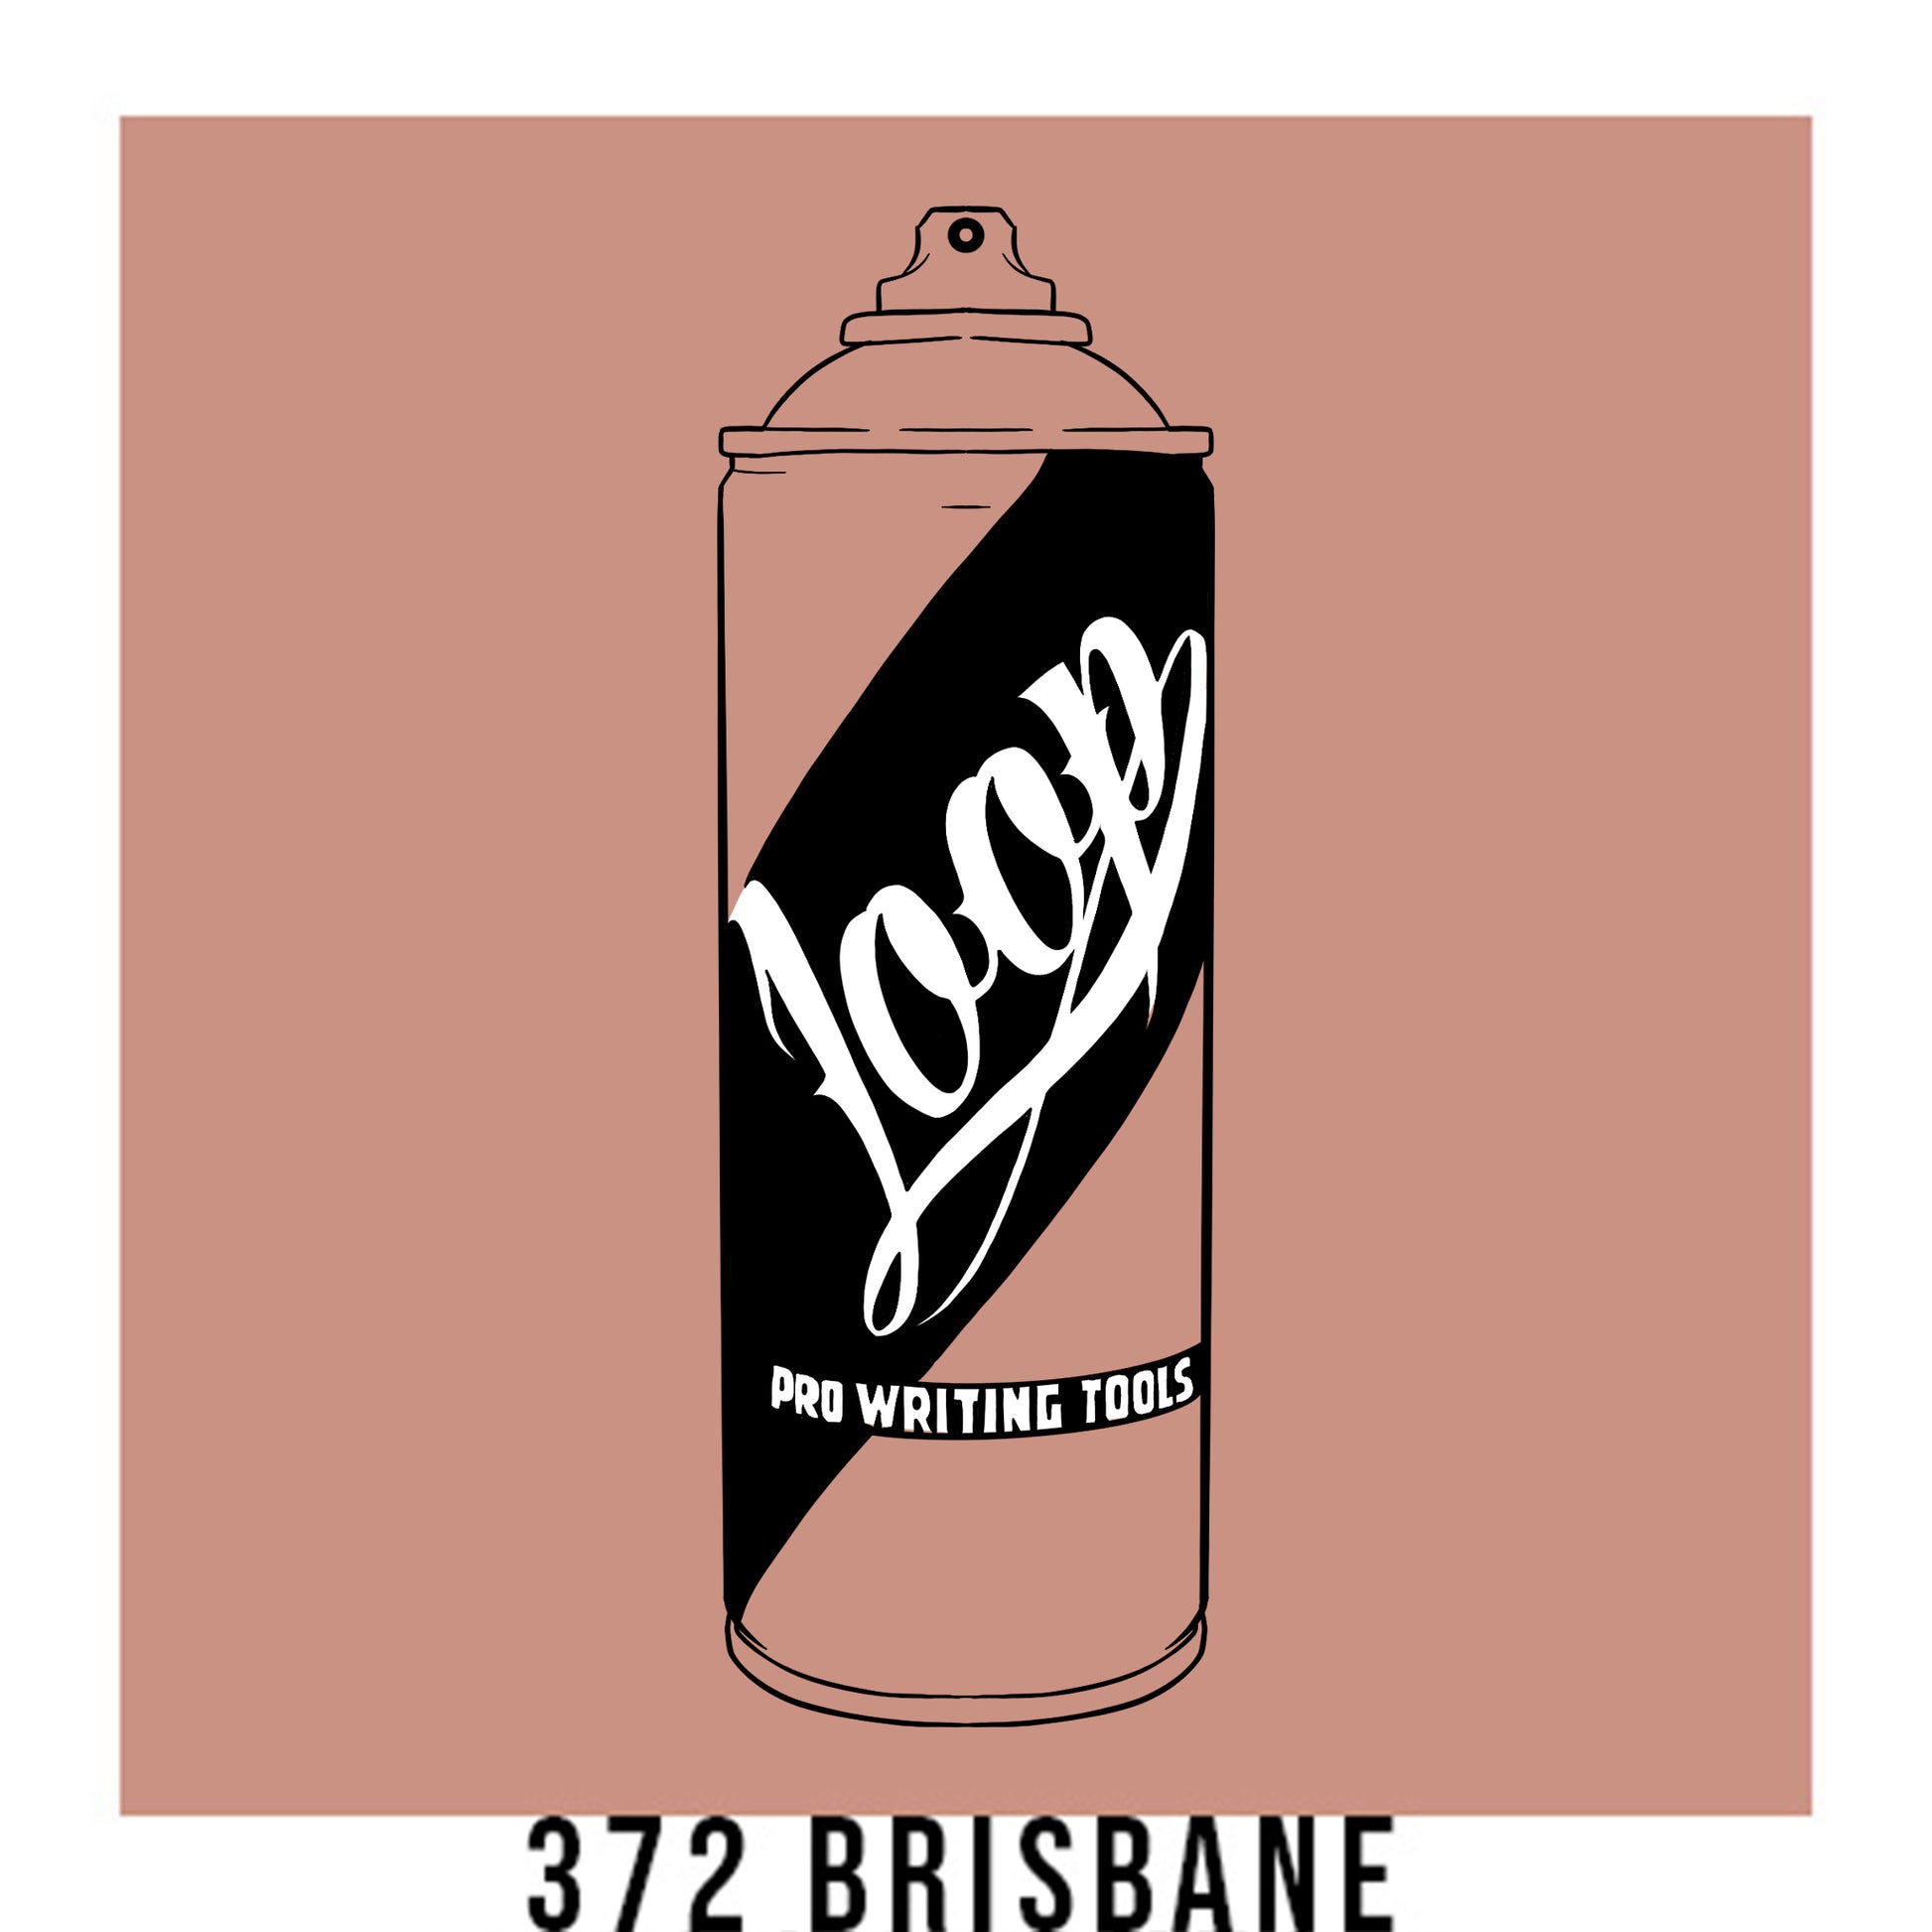 A black outline drawing of a muted salmon spray paint can with the word "Loop" written on the face in script. The background is a color swatch of the same muted salmon with a white border with the words "372 Brisbane" at the bottom.